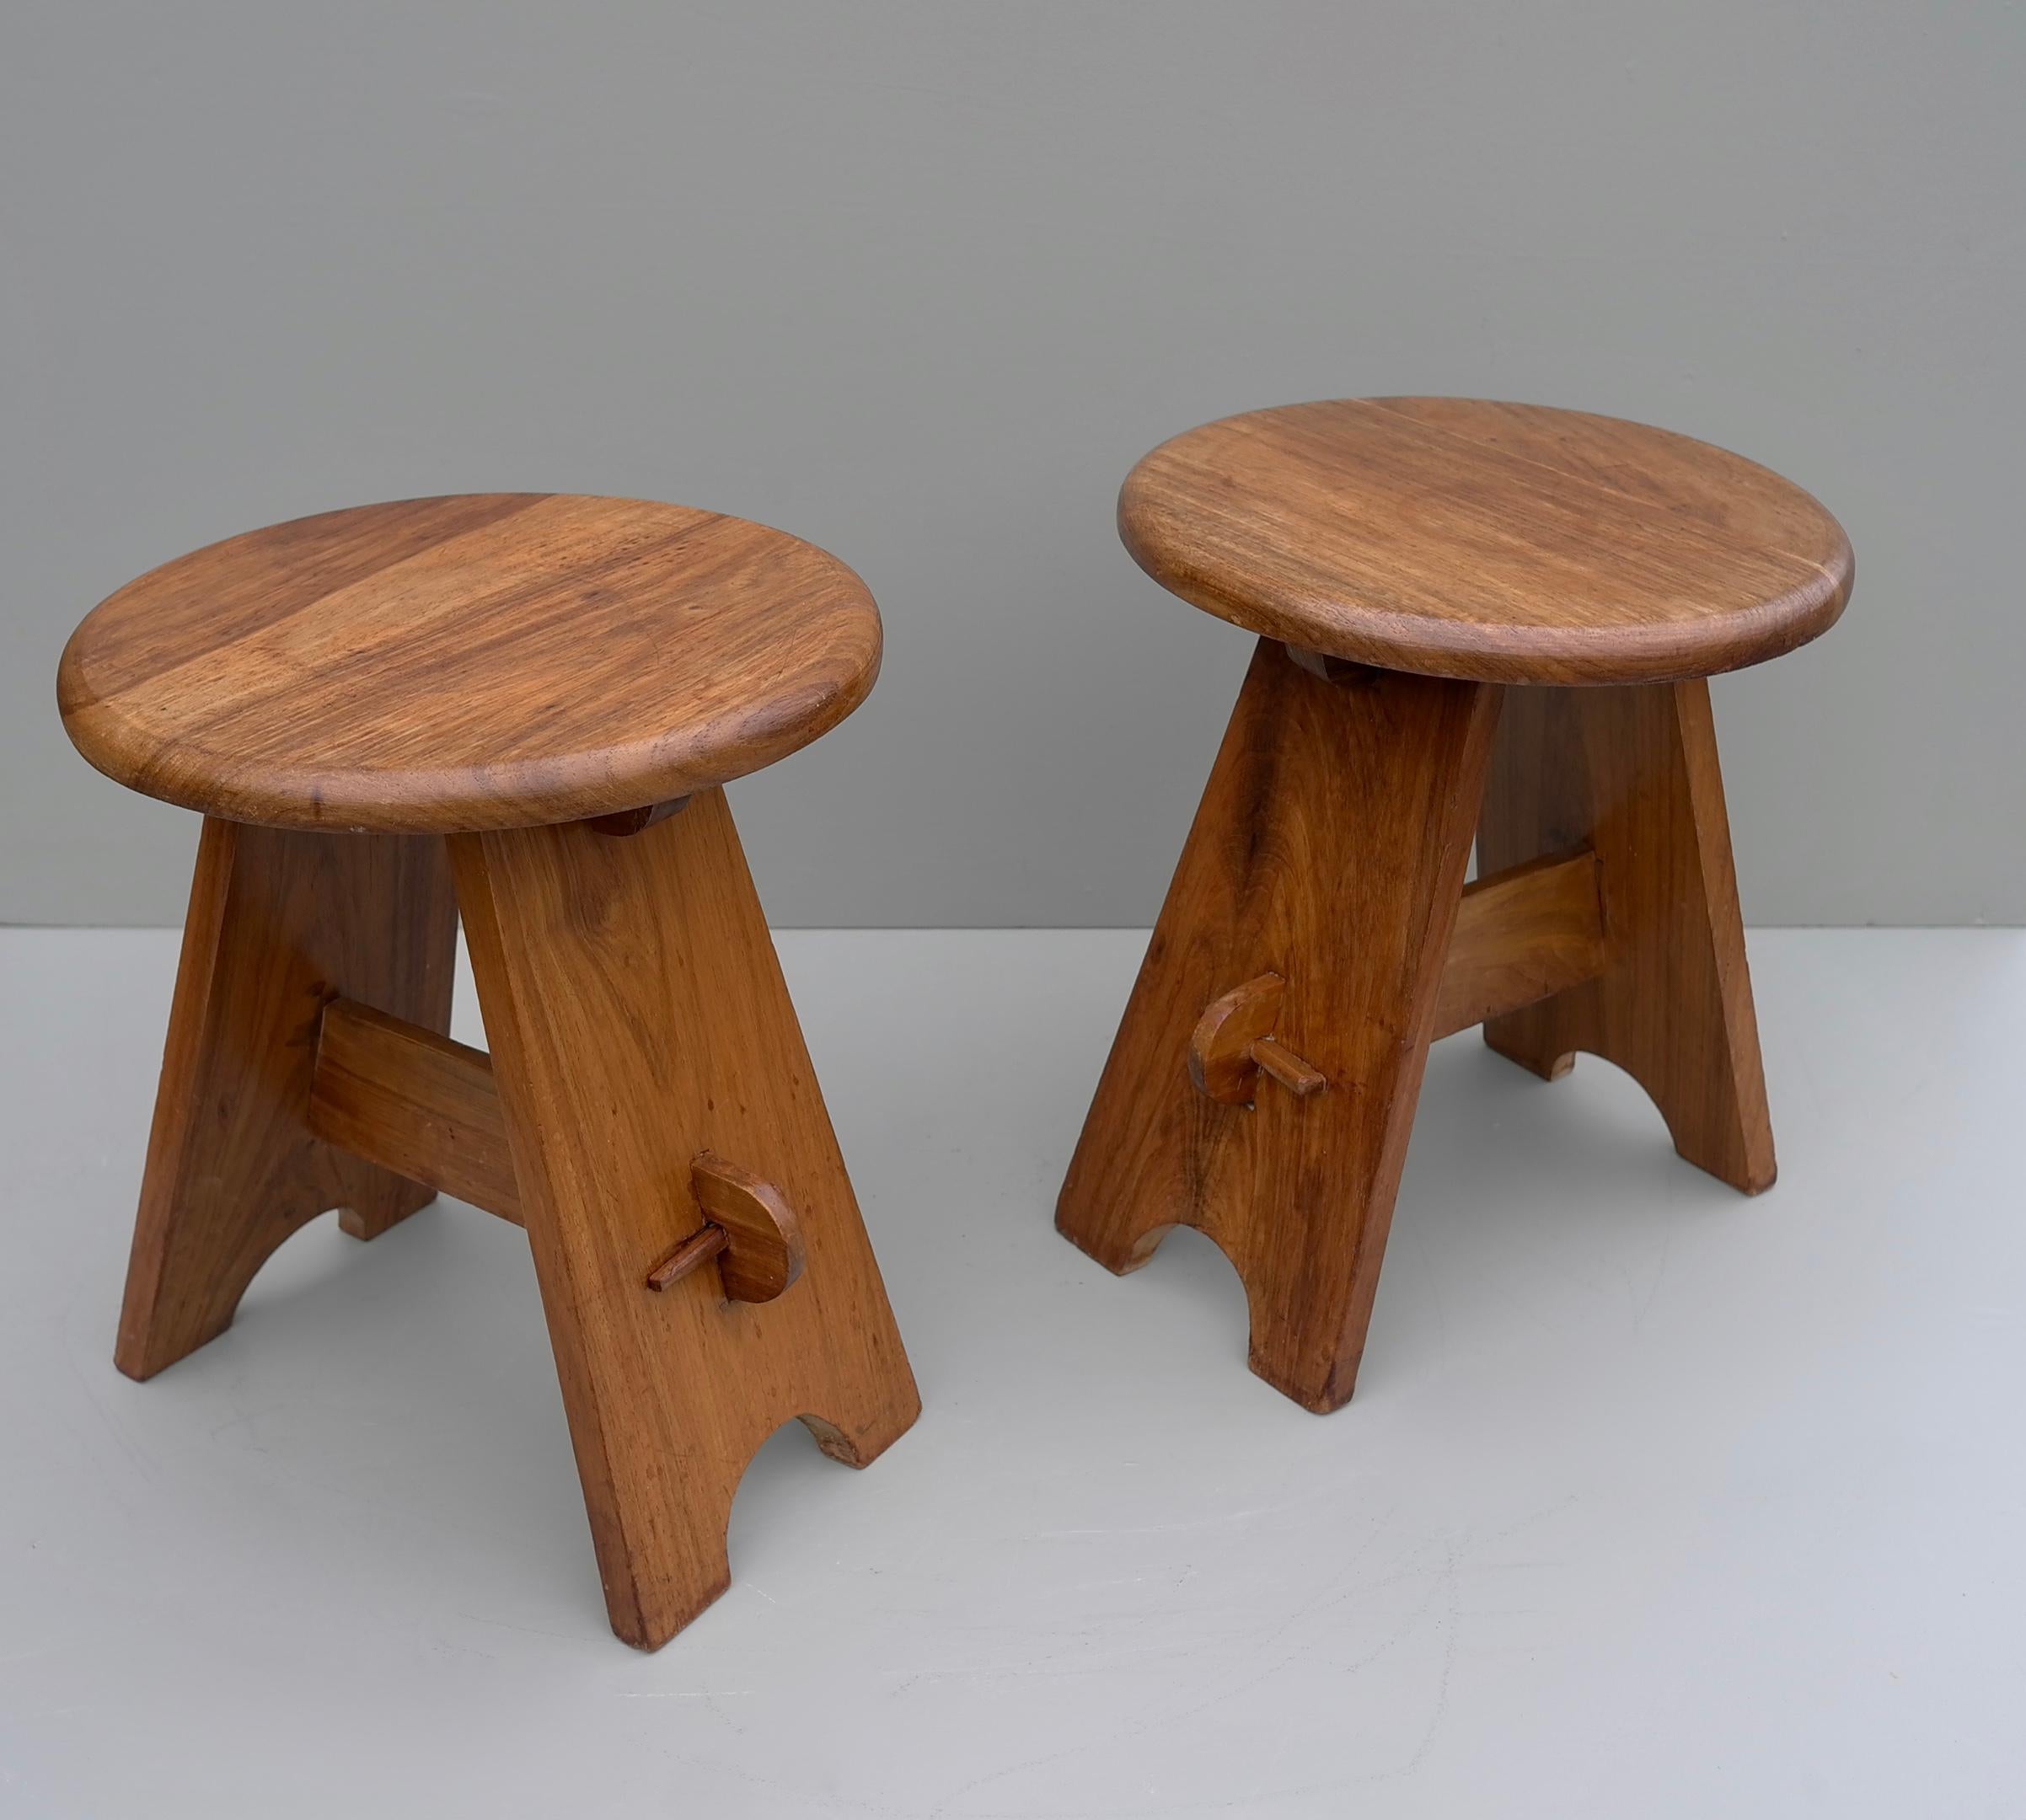 French Pair of Midcentury Stools in Solid Elm Wood, France, 1950s For Sale